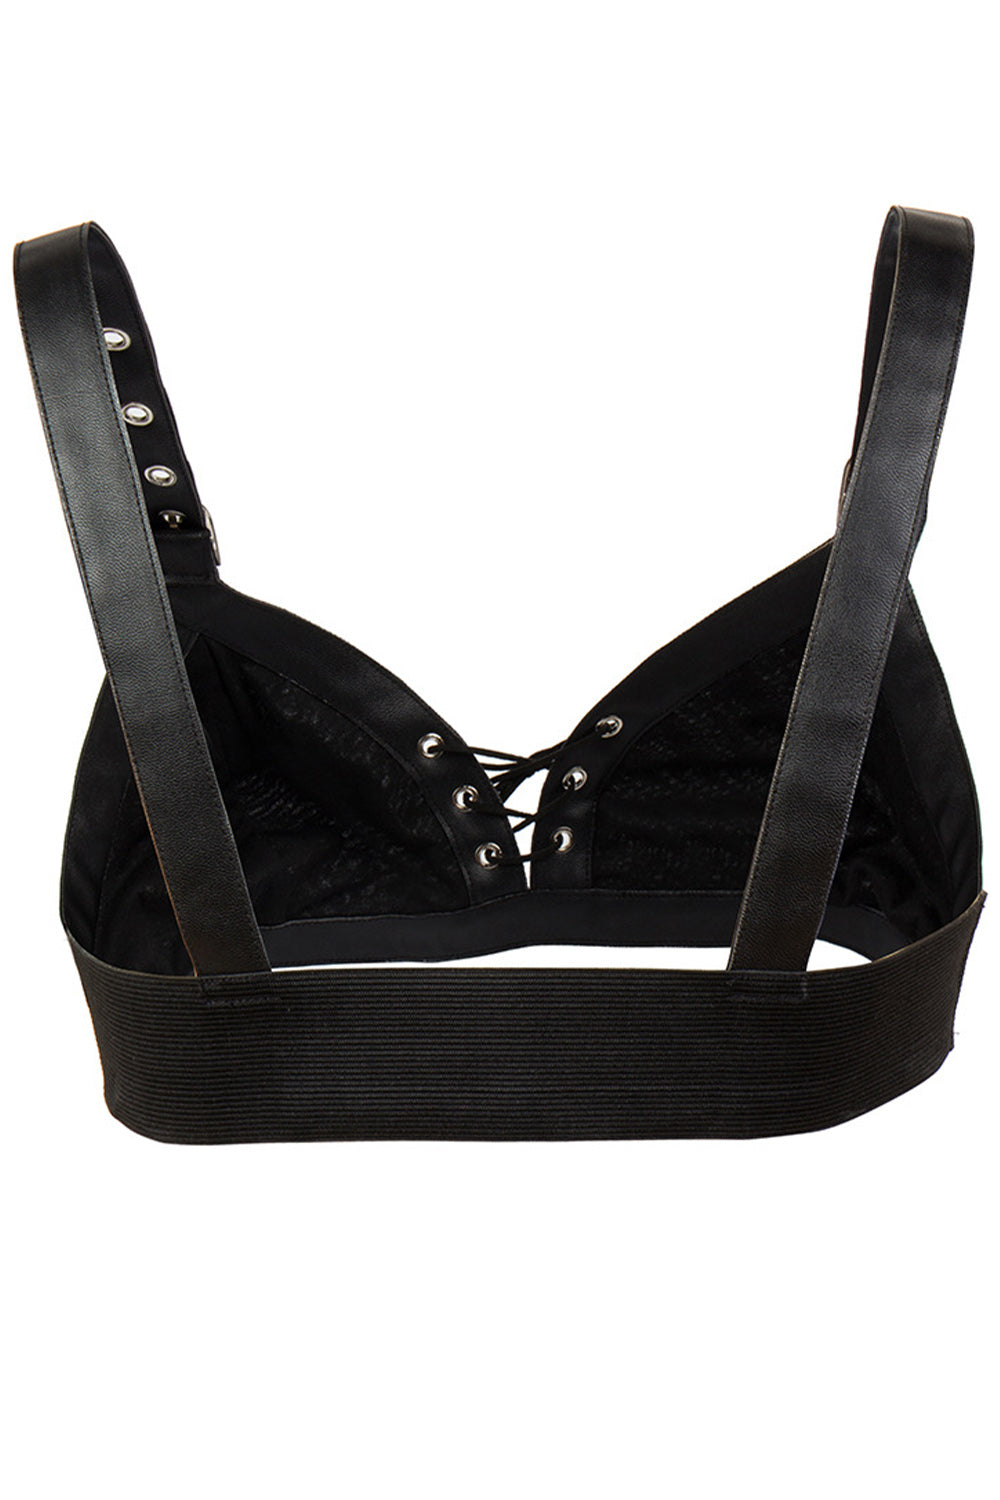 Gothic Black Grommet Buckle Strap Lace Up Without Steel Ring Bras